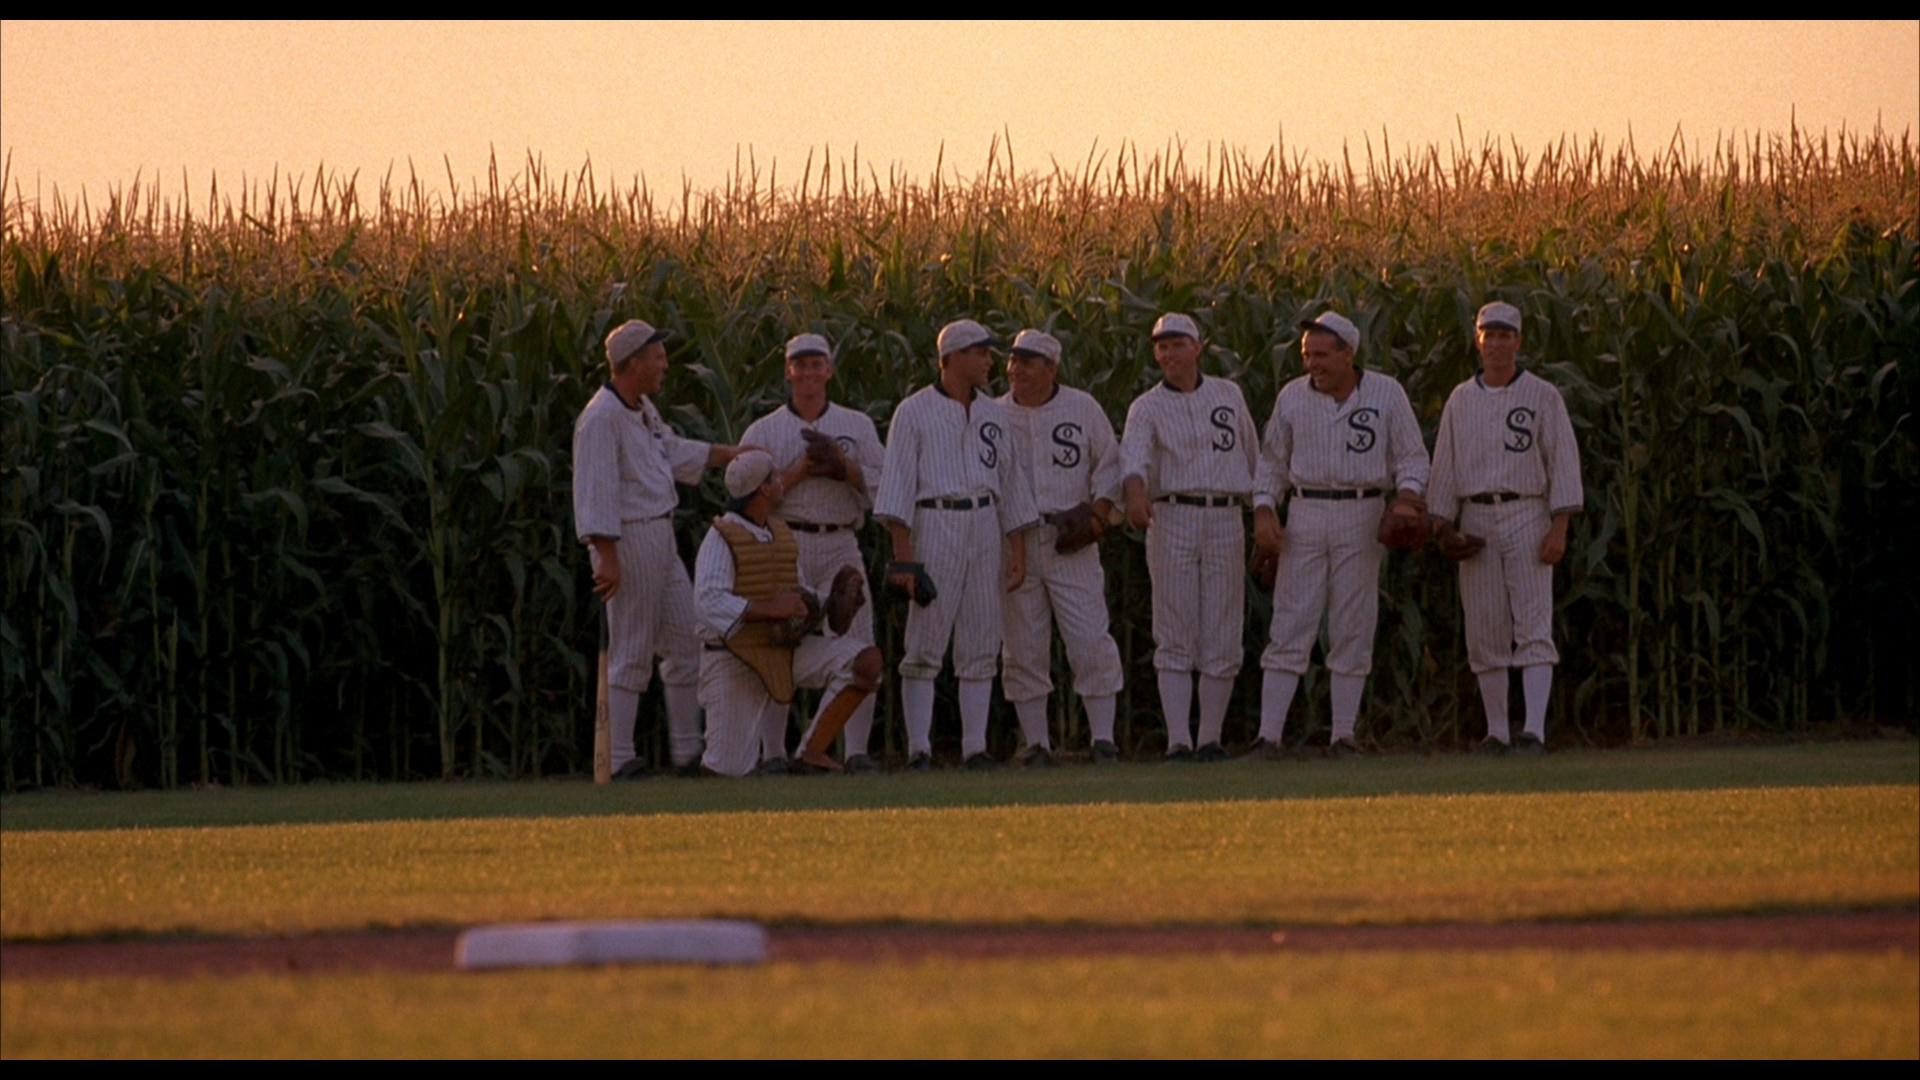 Is this heaven? No, it's the Iowa farm where “Field of Dreams” was